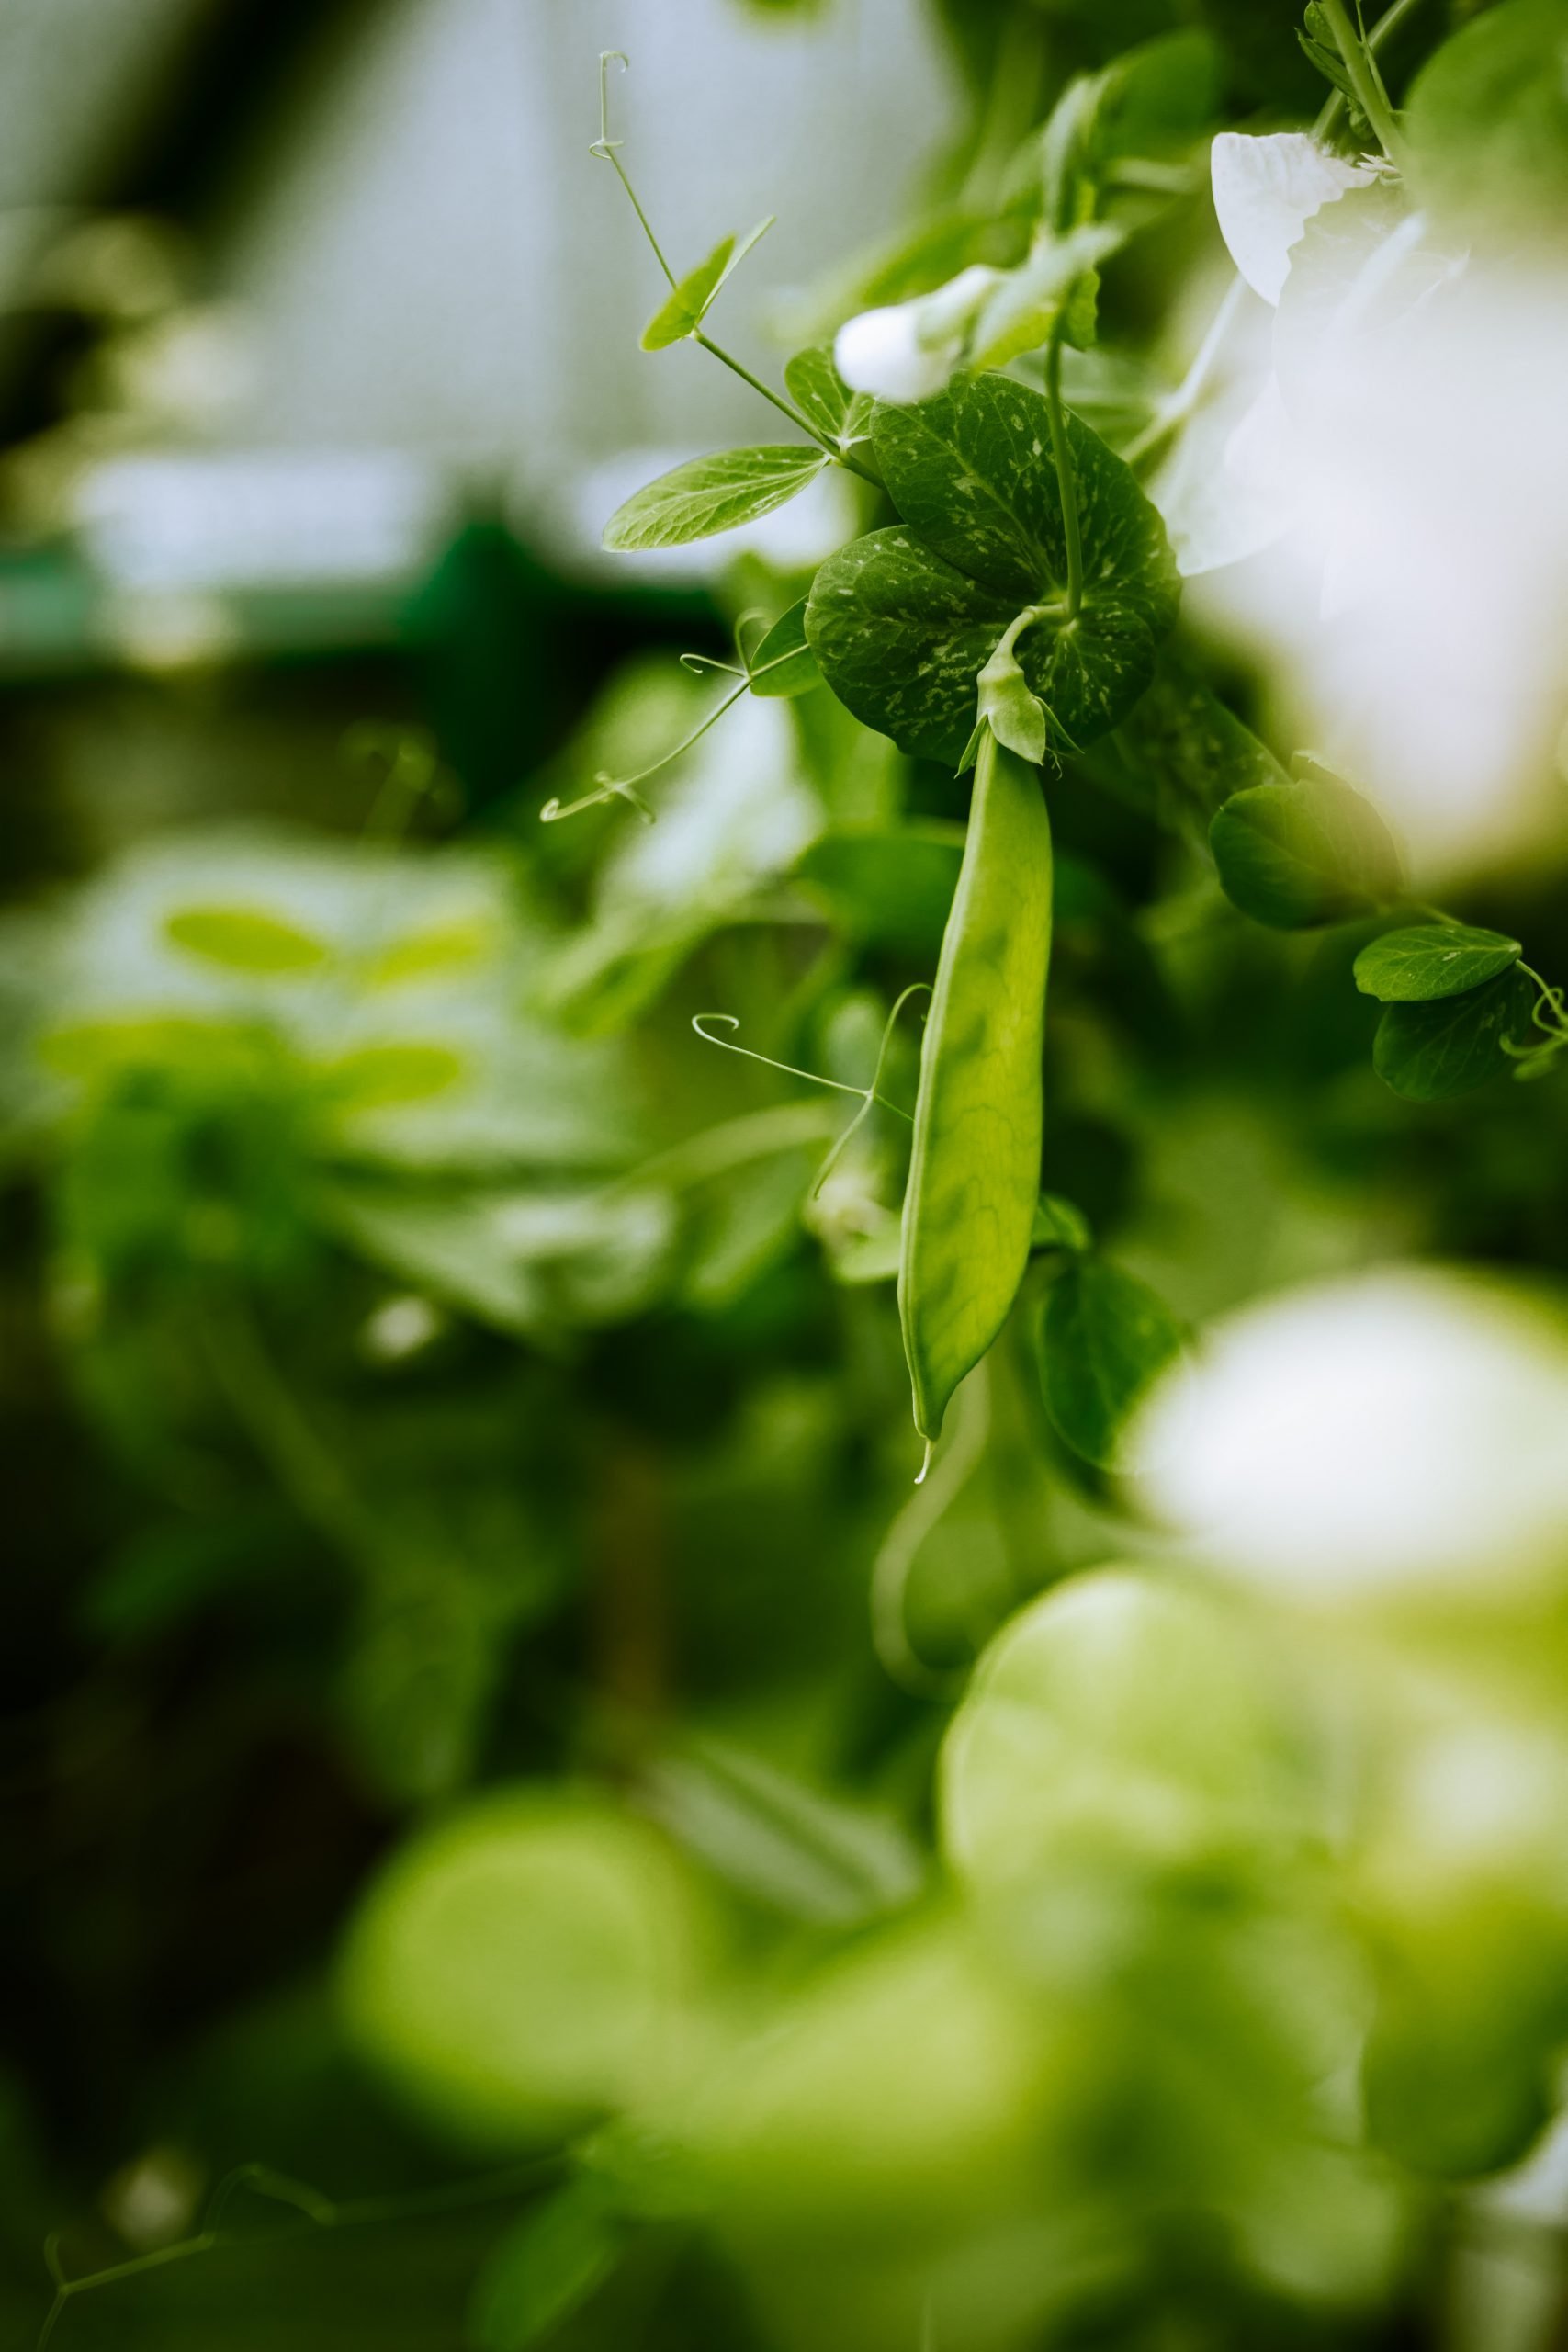 What Is The Best Fertilizer For Growing Peas?